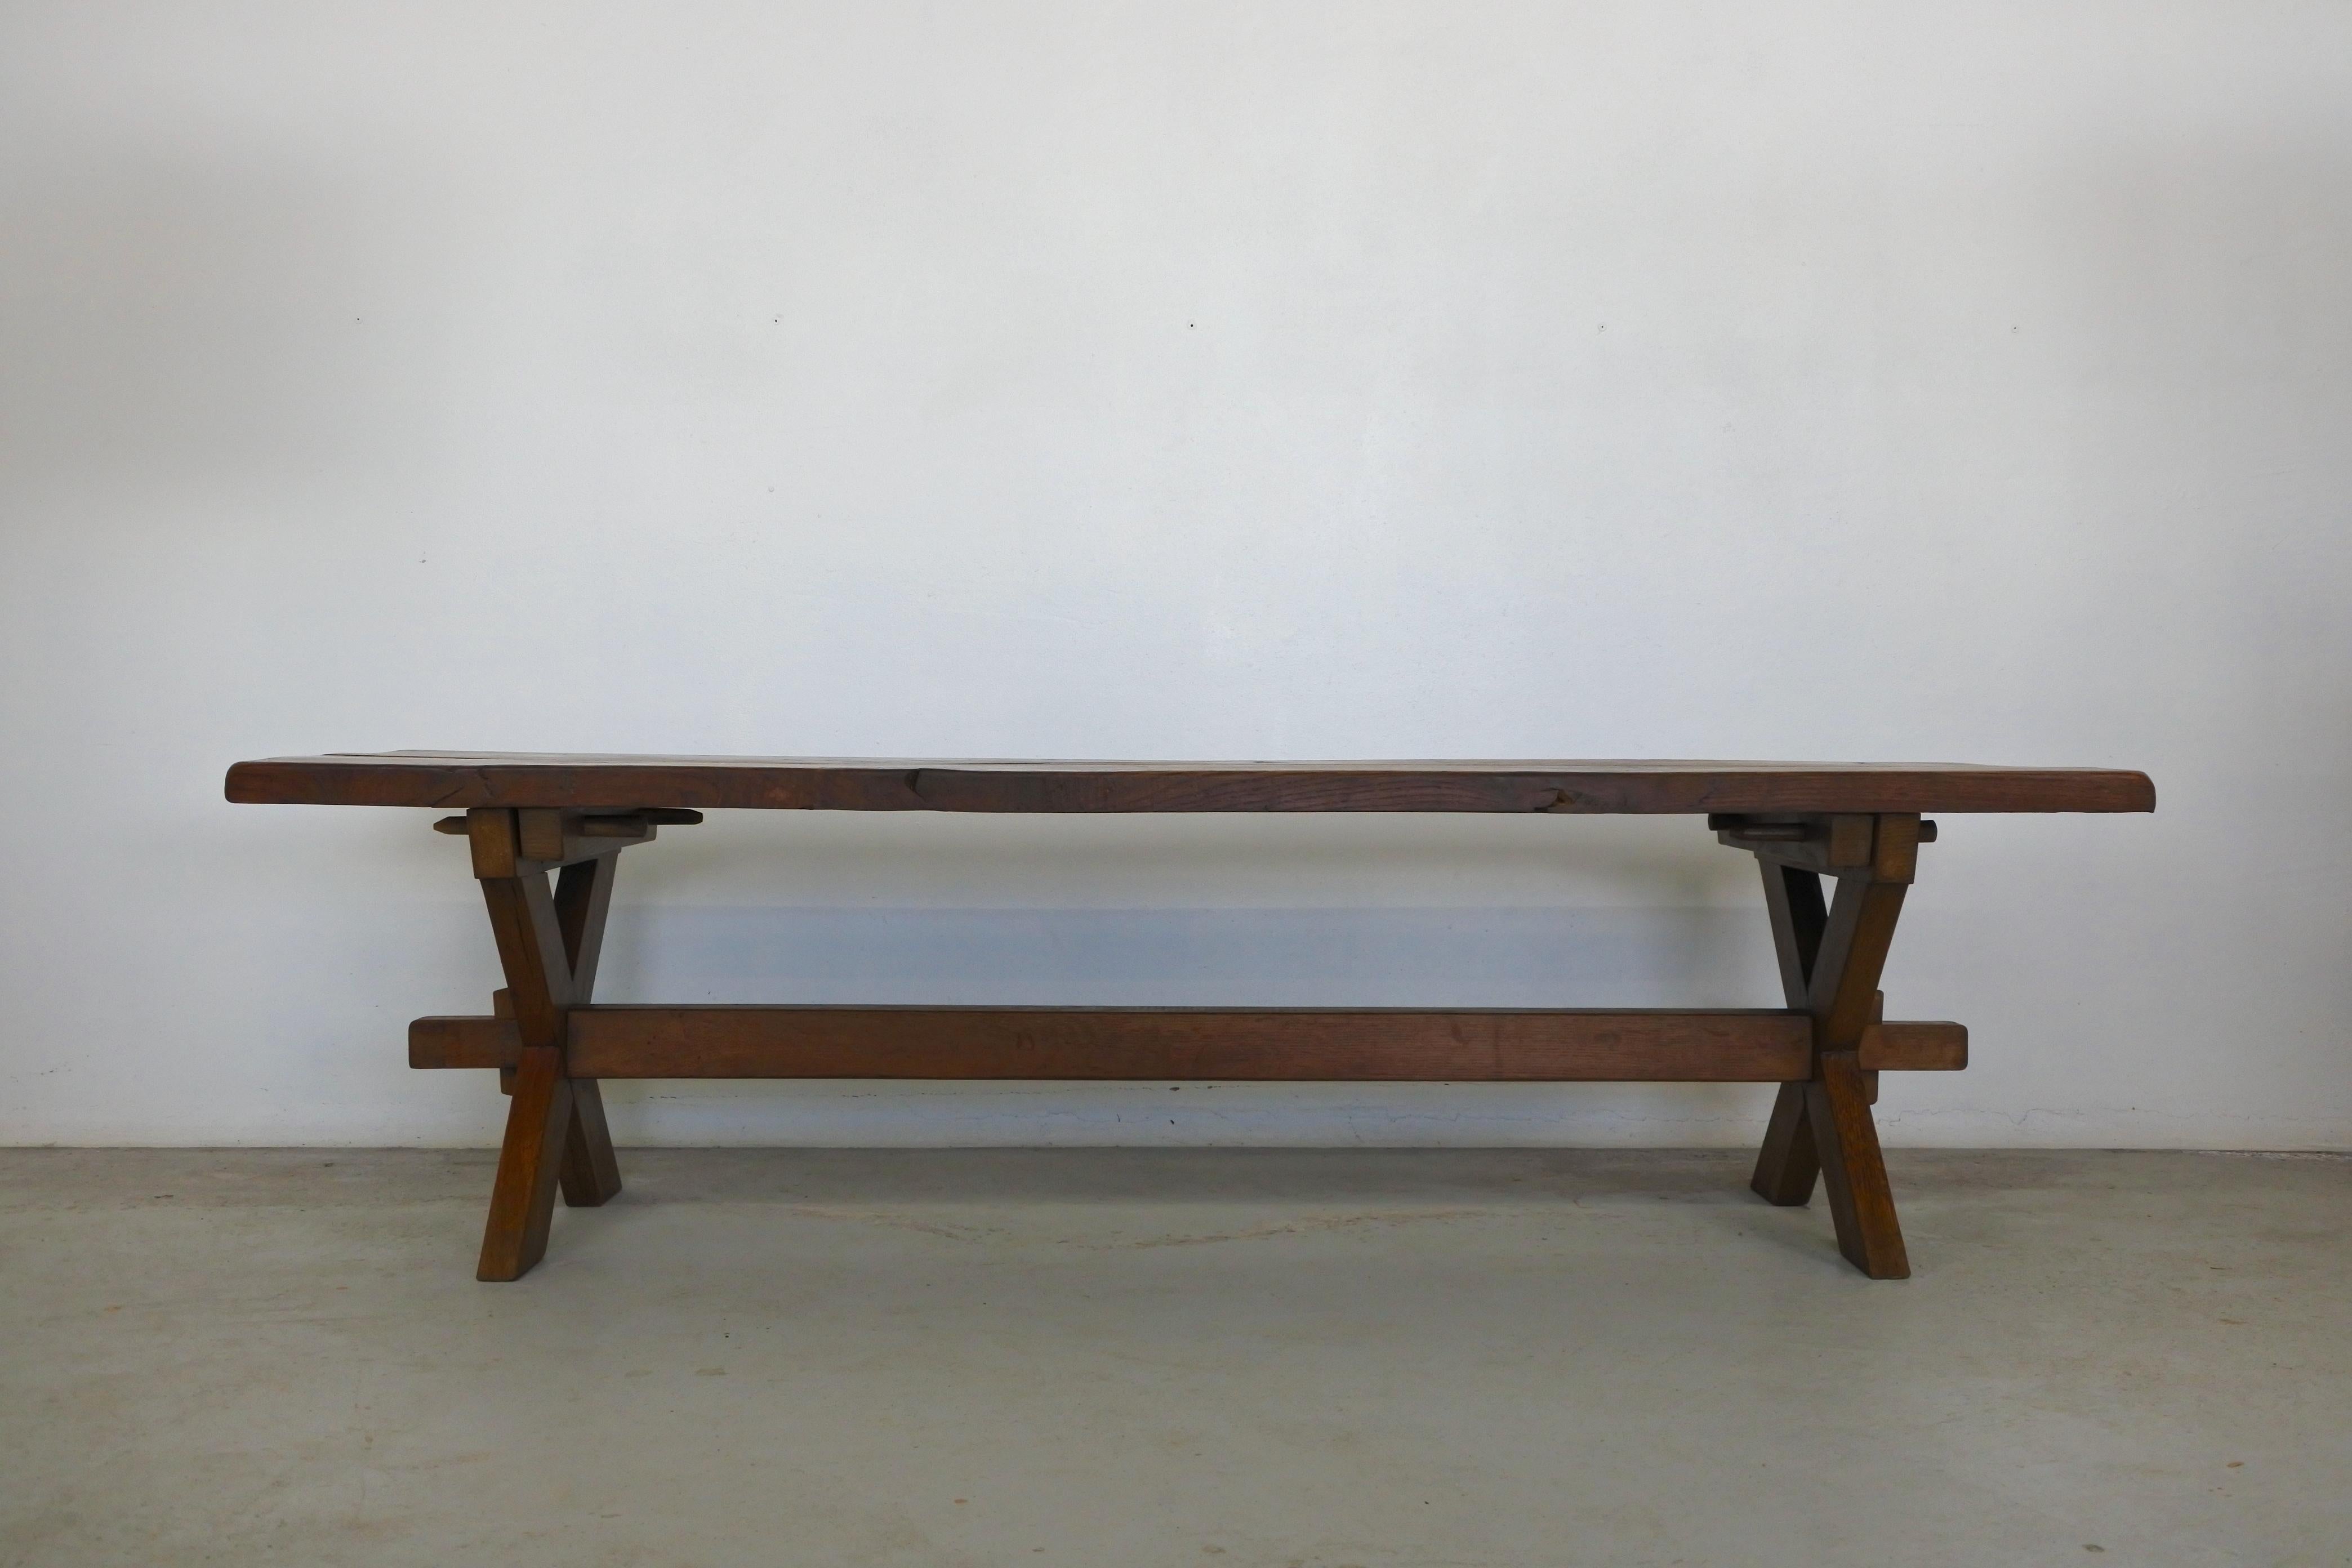 Large solid oak wood coffee table with X-shaped feet and rectangular top. 
Made in France in the 1940s.

Outstanding patina and grain. Beautiful details.

Provenance: Chalet in the French Alps.
 